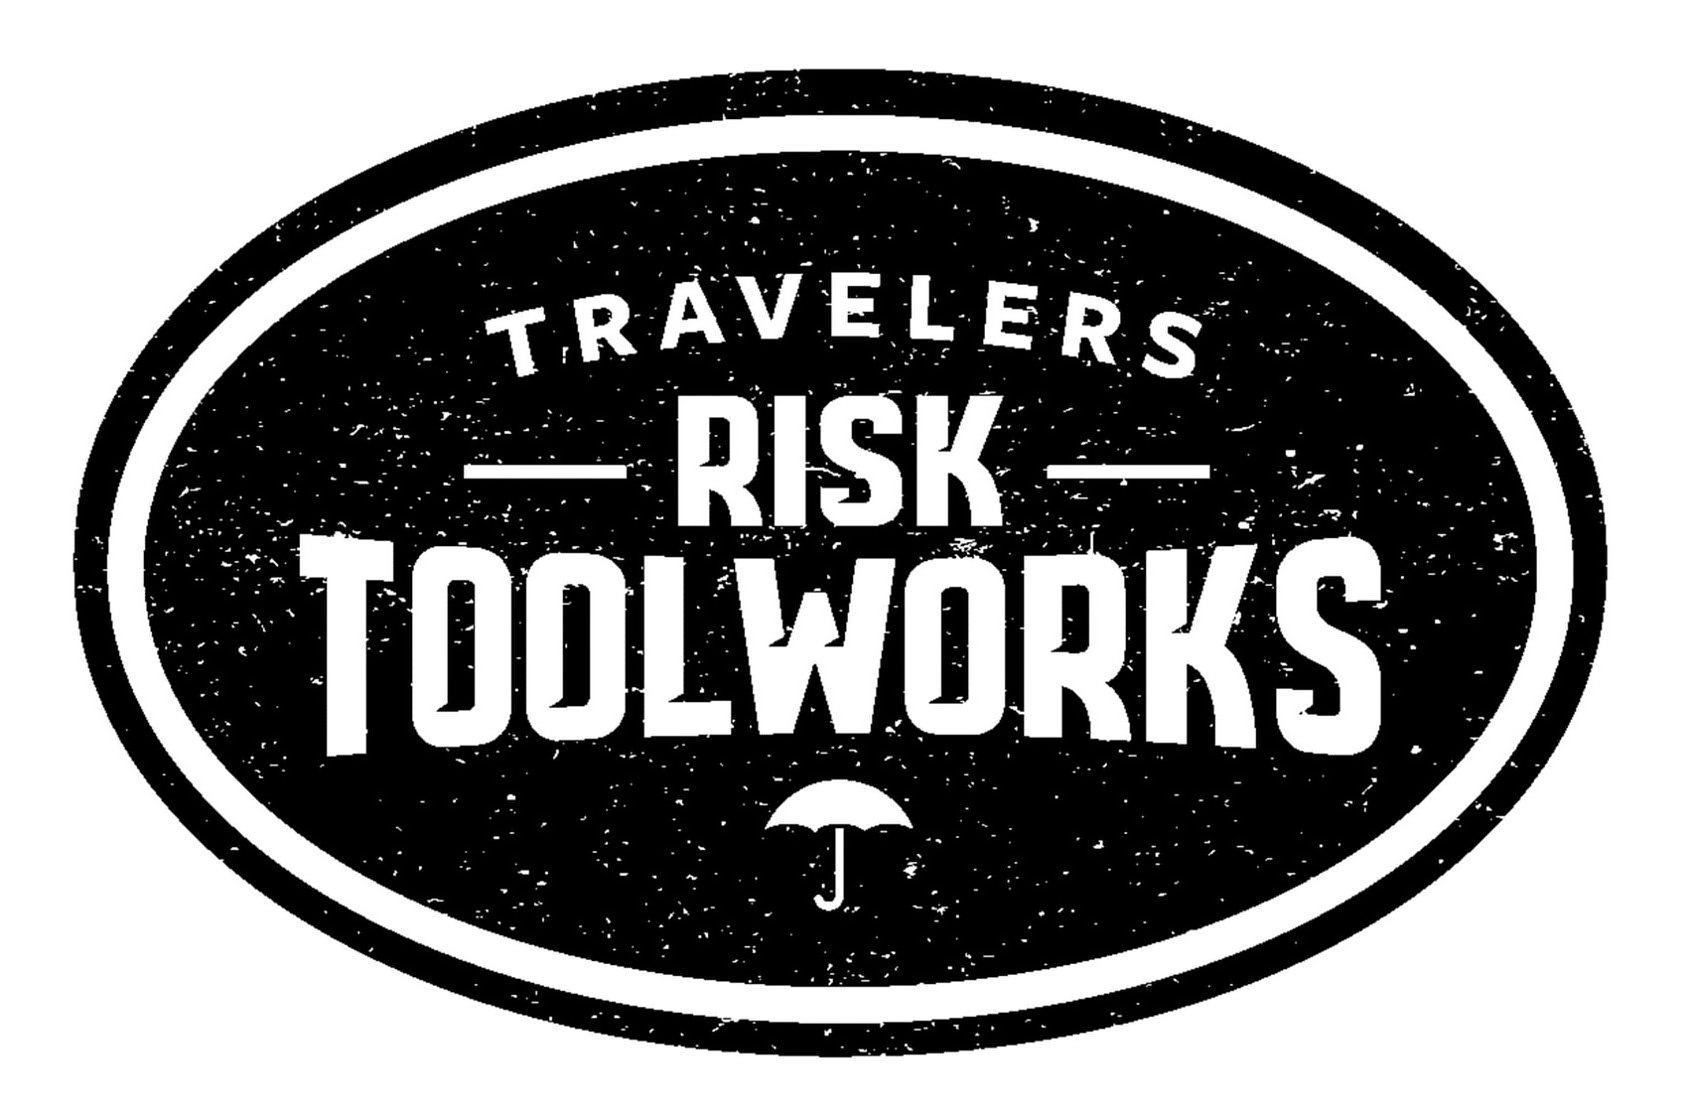  TRAVELERS RISK TOOLWORKS